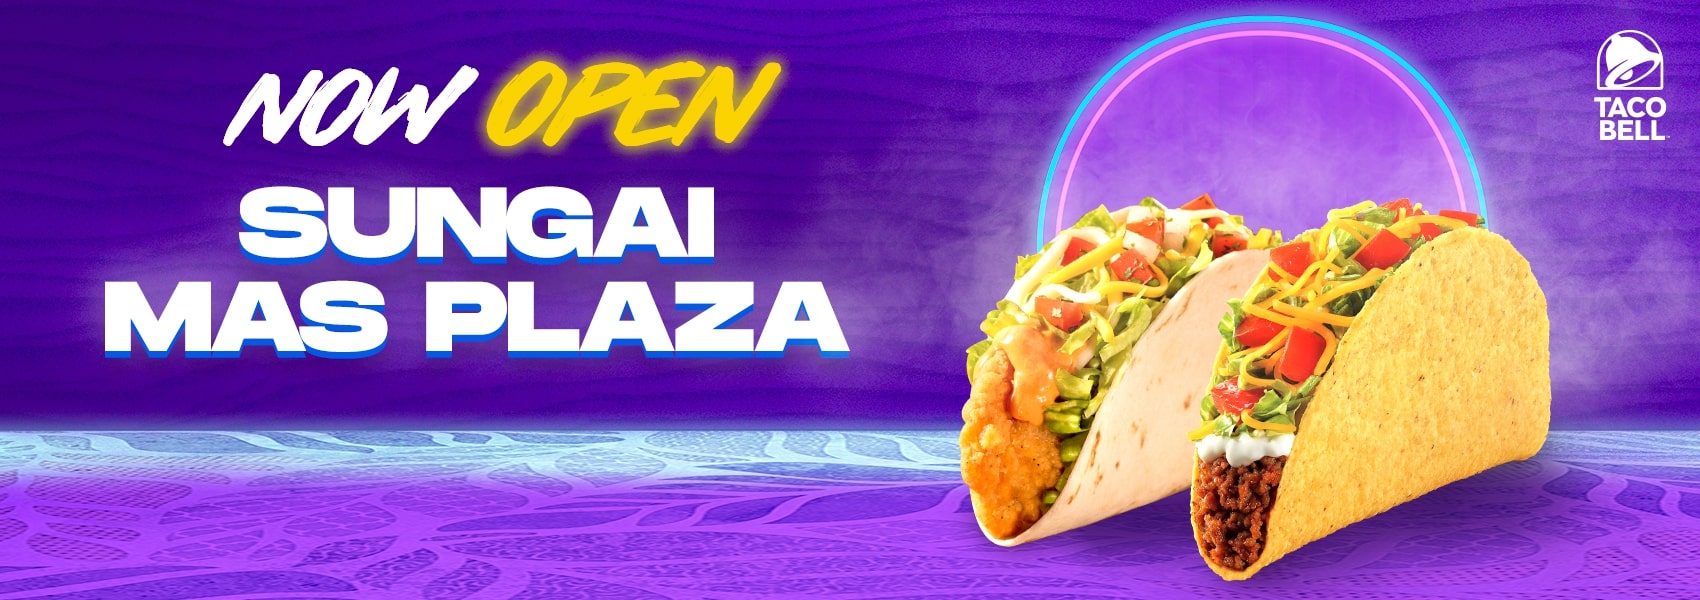 Home - Taco Bell